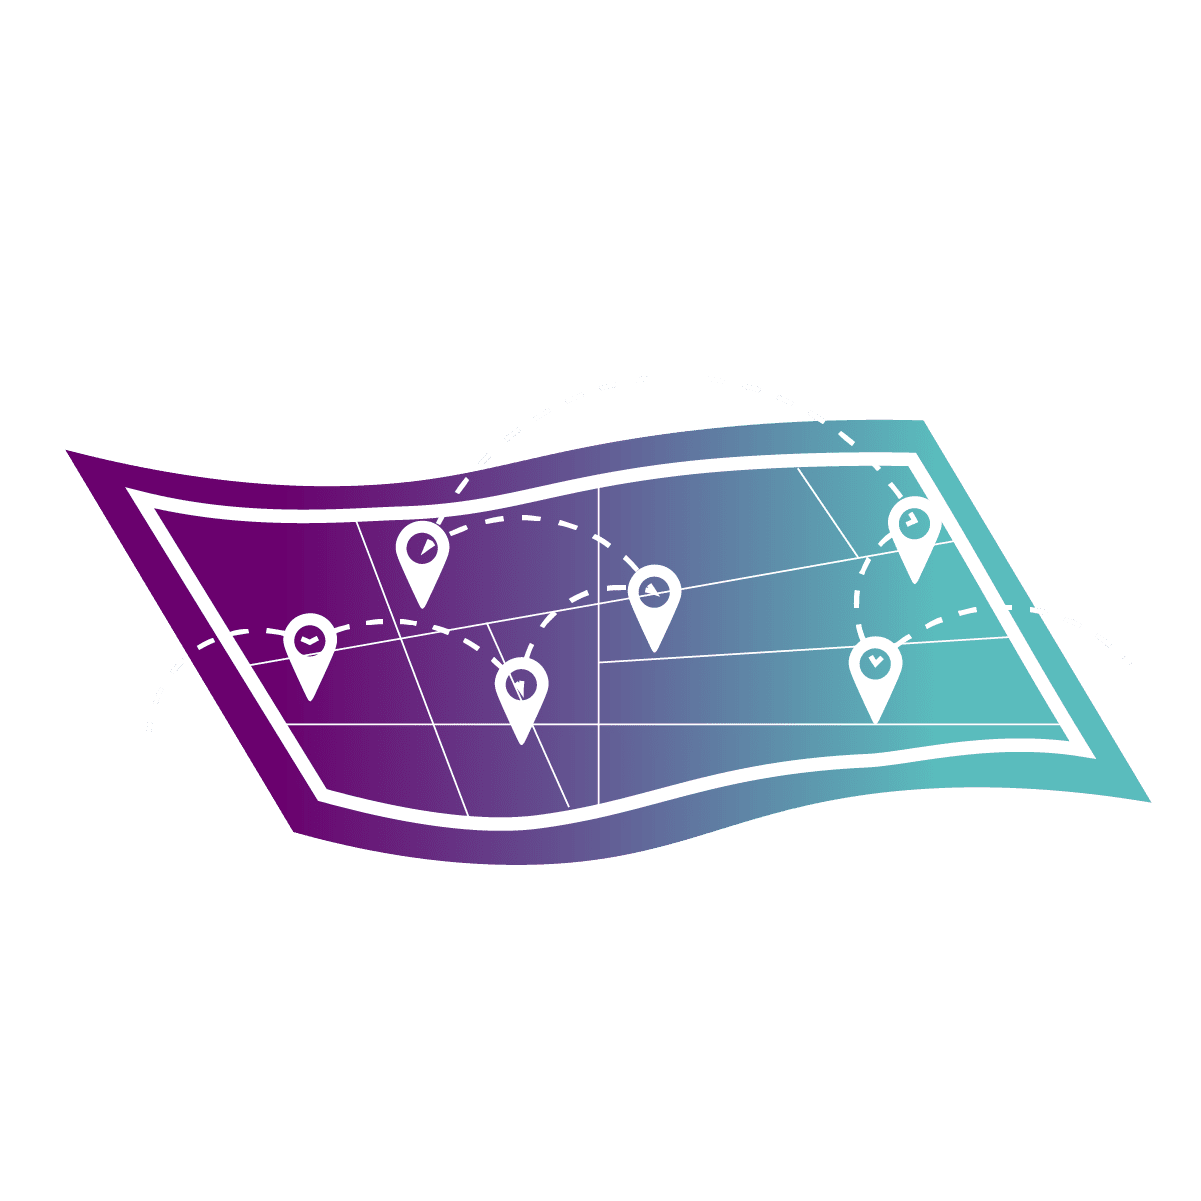 Icon of a stylized map with gradient colors from purple to teal, featuring five location pins connected by dotted lines. The map gives a sense of direction and connectivity, as if guiding you smoothly without stuttering along the way.